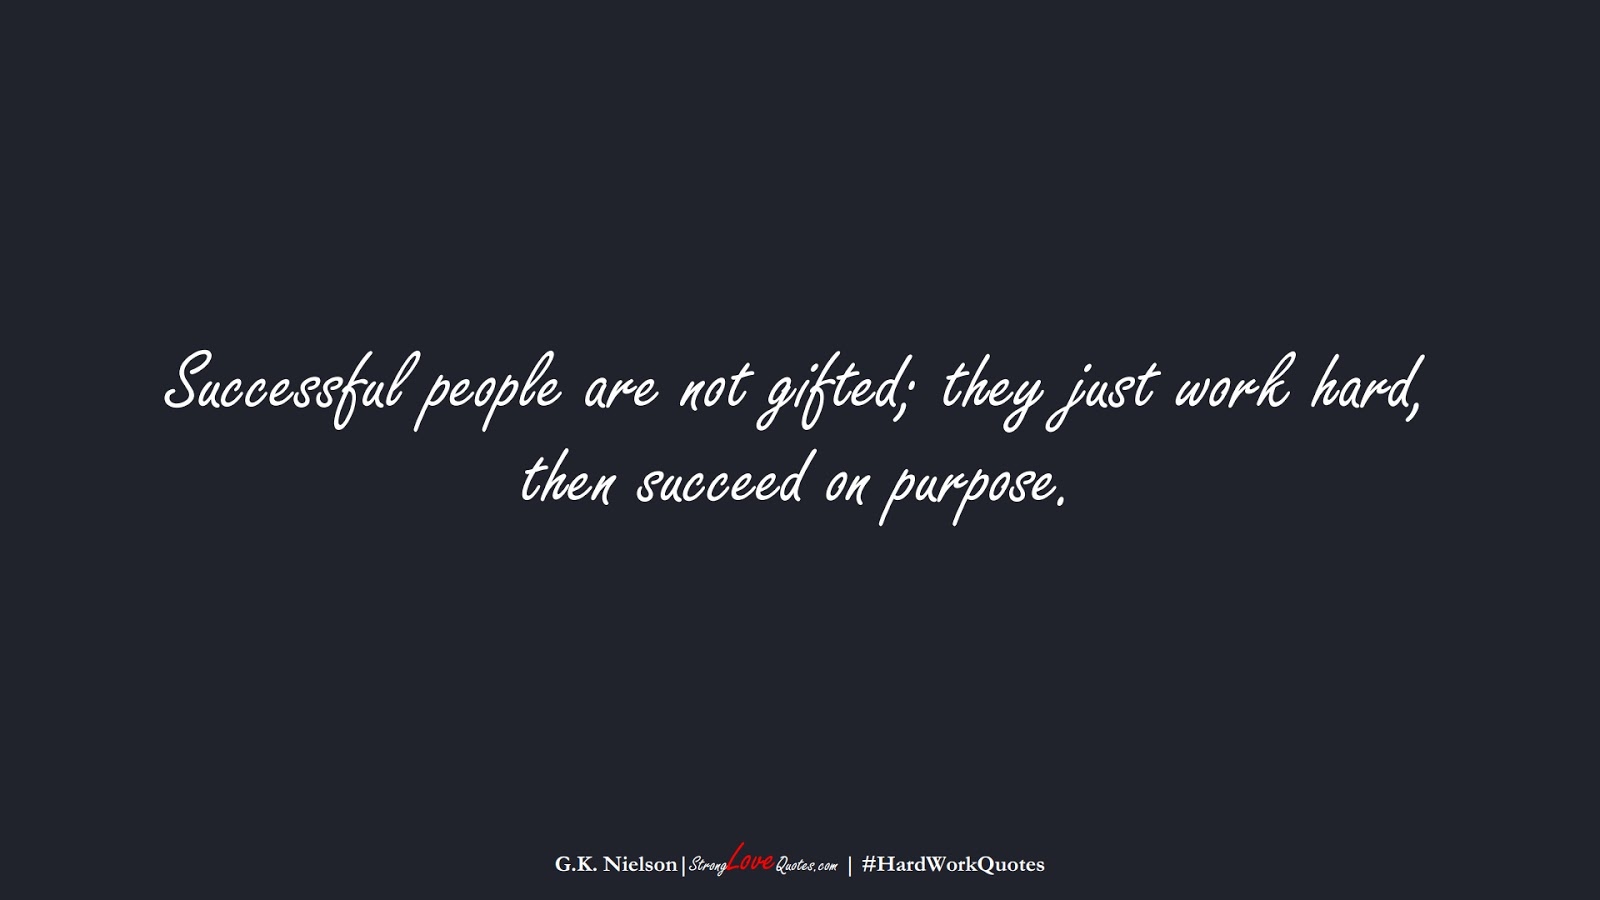 Successful people are not gifted; they just work hard, then succeed on purpose. (G.K. Nielson);  #HardWorkQuotes